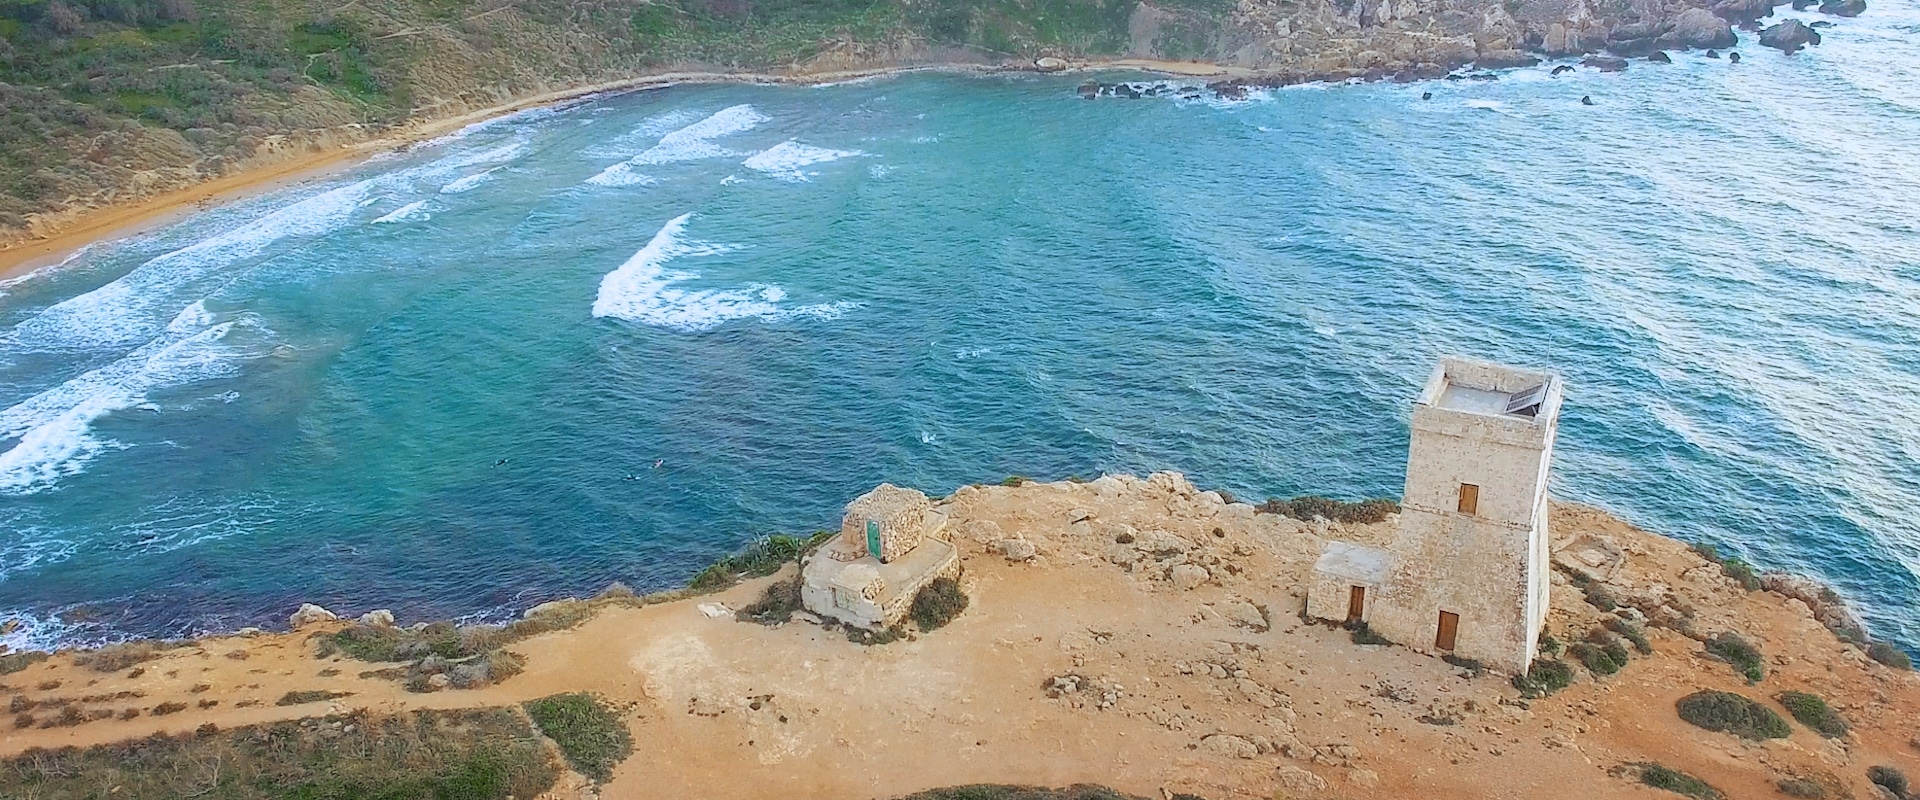 Malta iconic tower in save the date video - Aerial view with drone